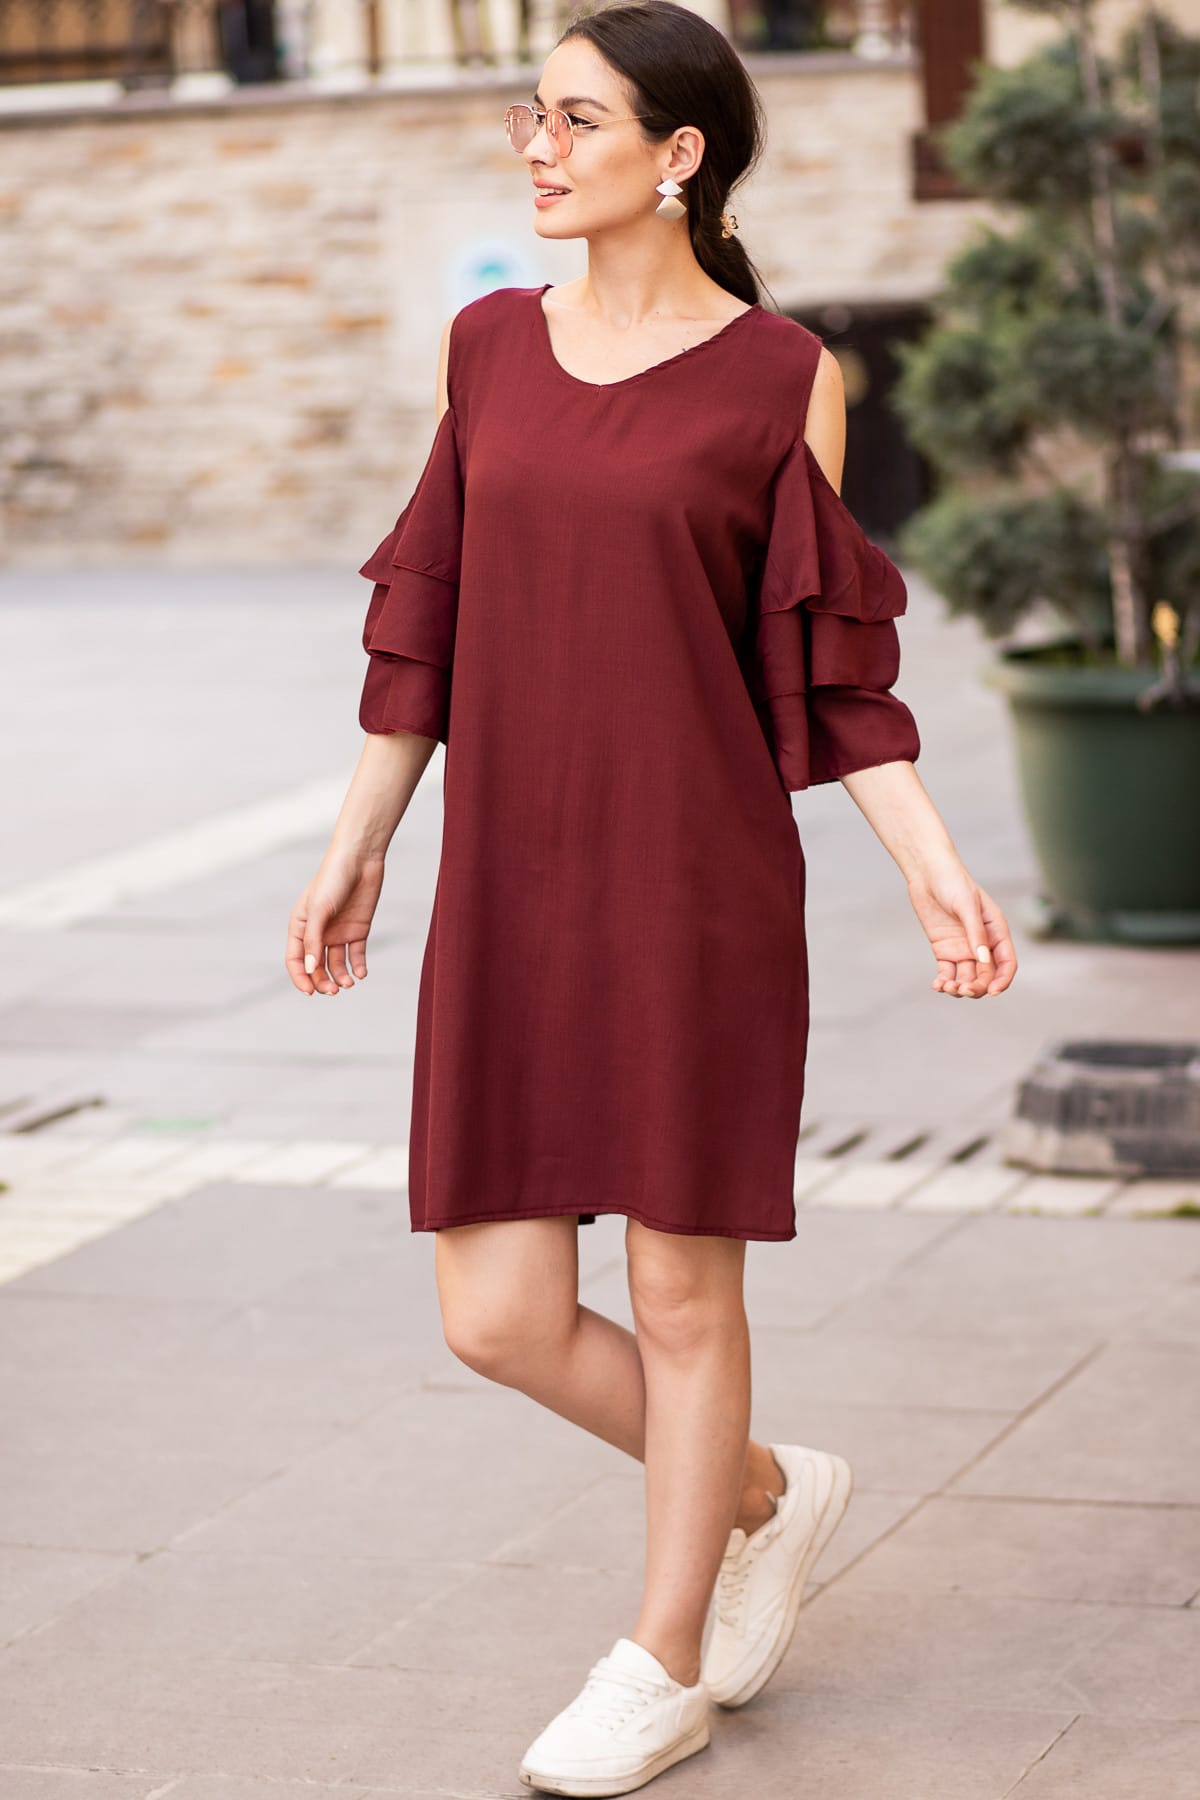 armonika Women's Burgundy V-Neck Dress with Open Shoulders and Ruffled Sleeves